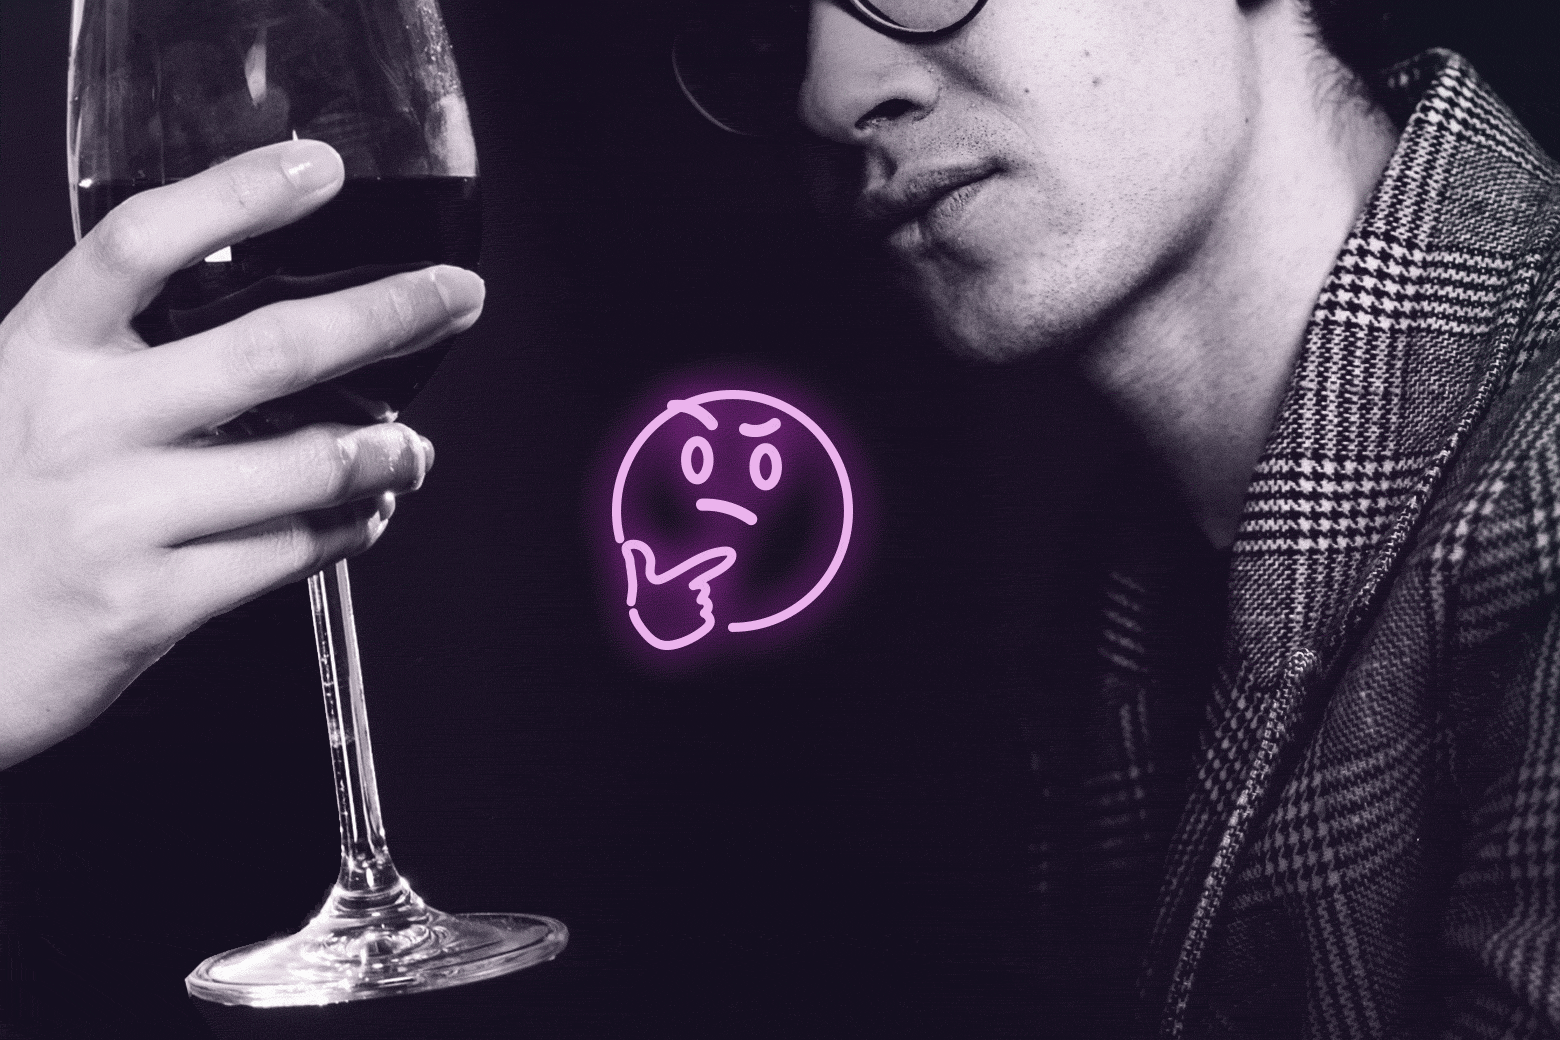 A hand holds a wine glass, a "thinking face" emoji, and a man in a tweed jacket.